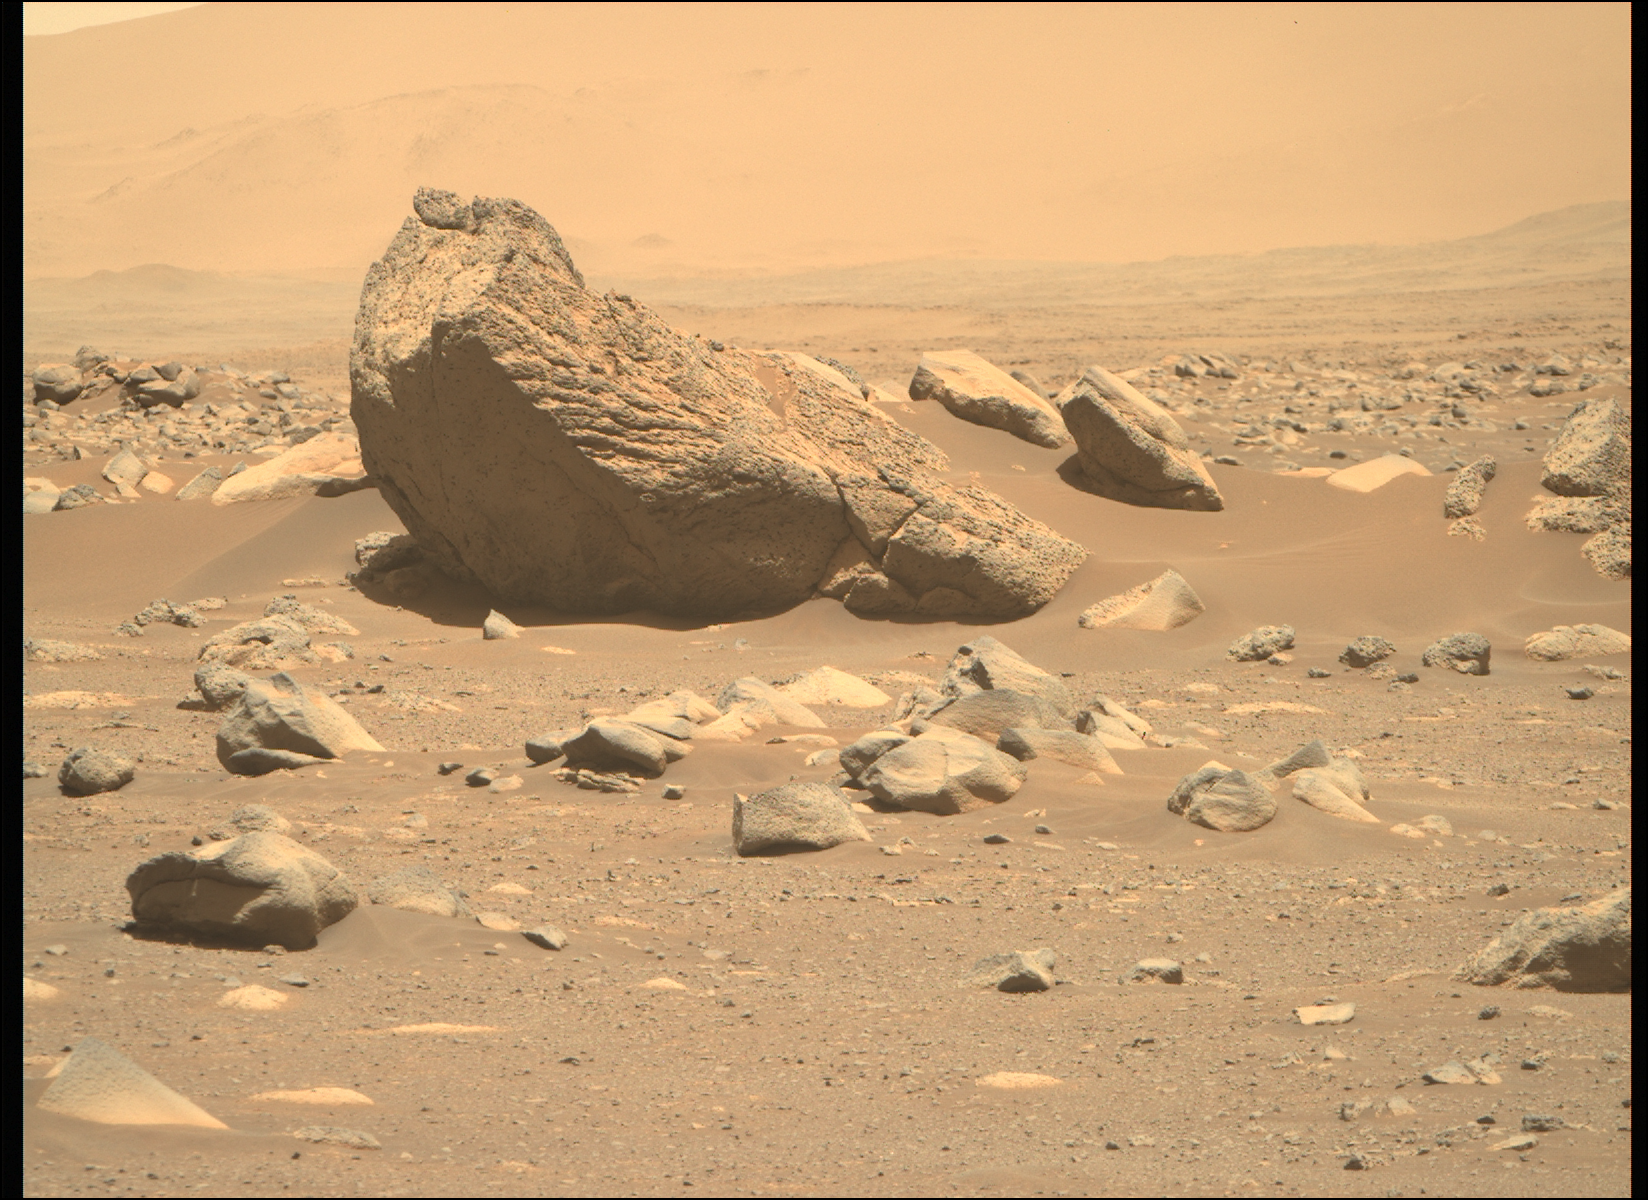 Mars_Perseverance_ZR0_0110_0676704984_053EBY_N0040822ZCAM03159_1100LMJ.png